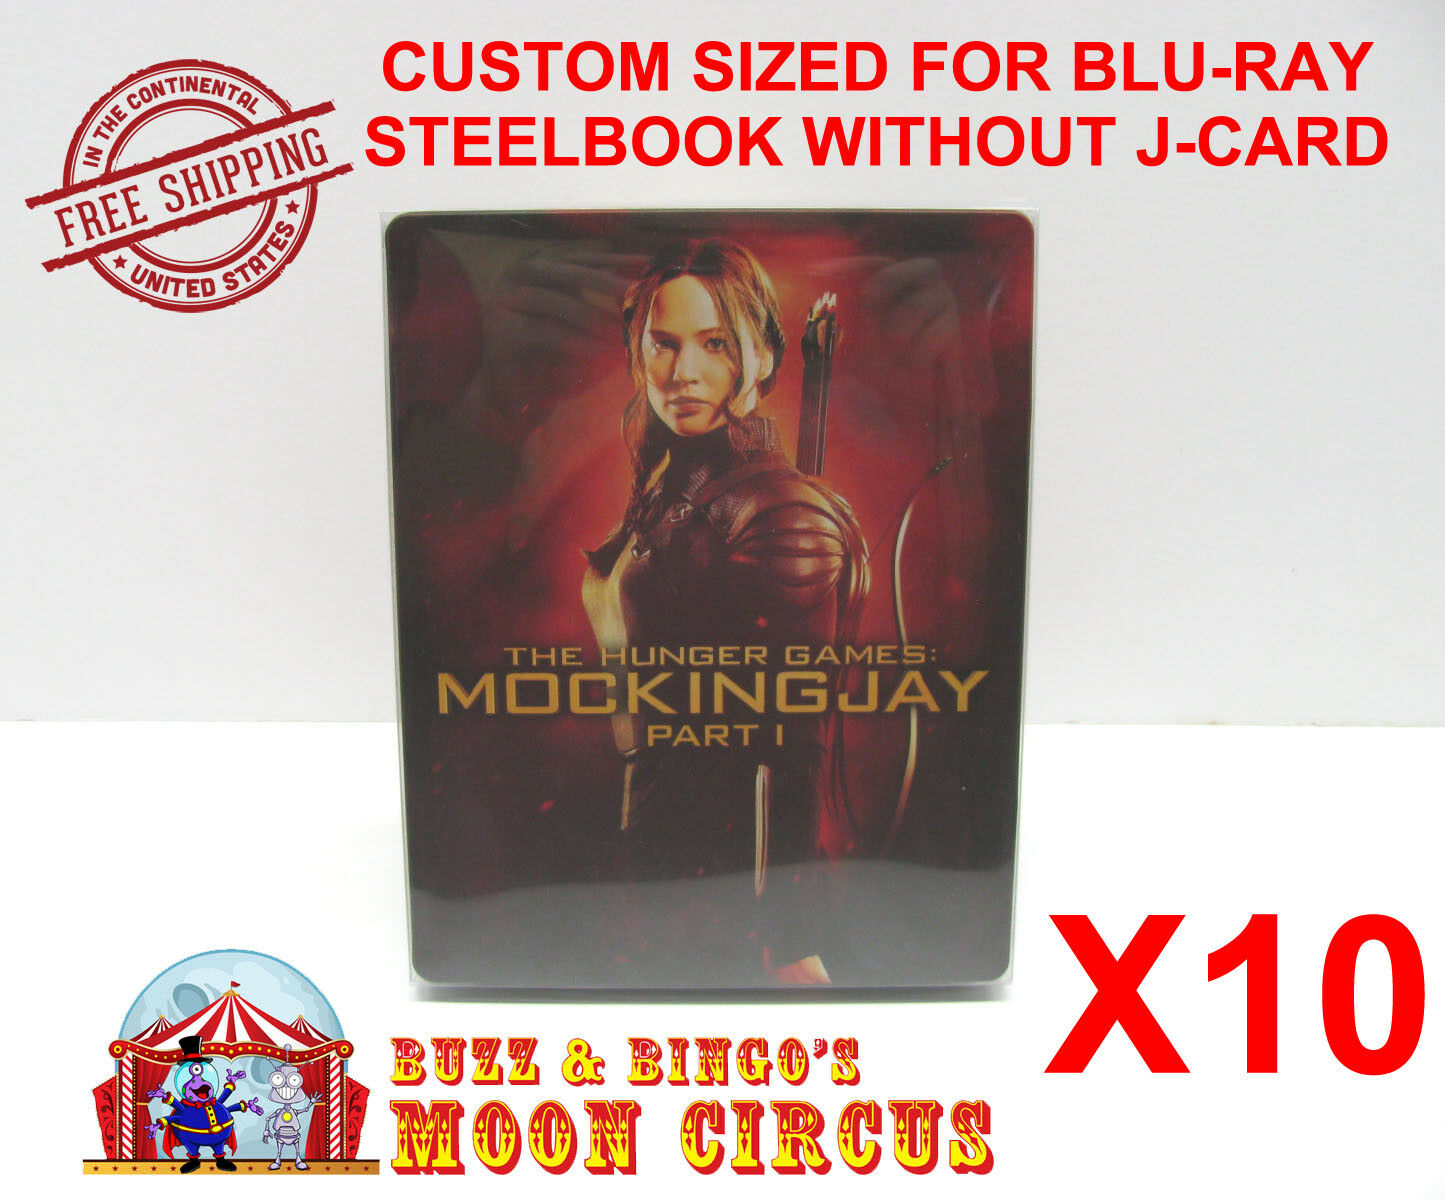 10x Blu-ray Steelbook Clear Protective Sleeve - Box Protectors - No J-card Size